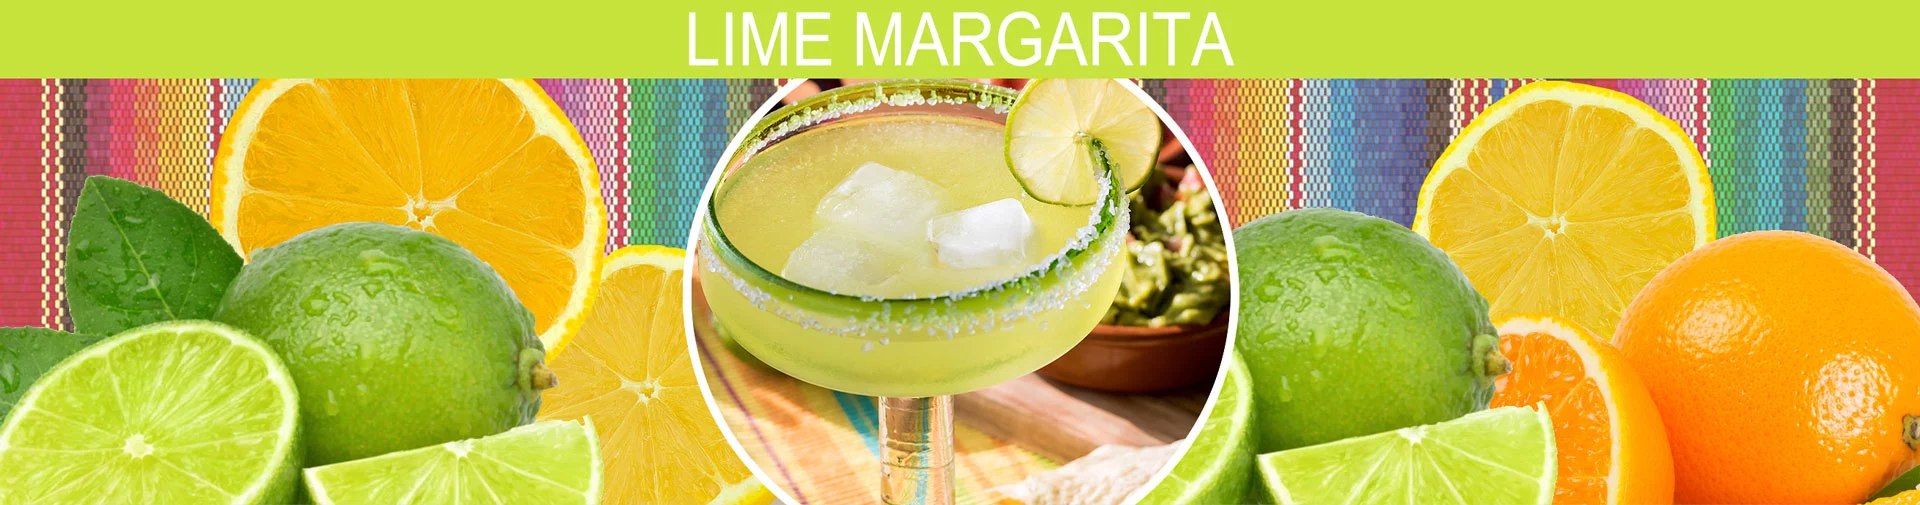 Banner image of lime margarita with oranges and limes.